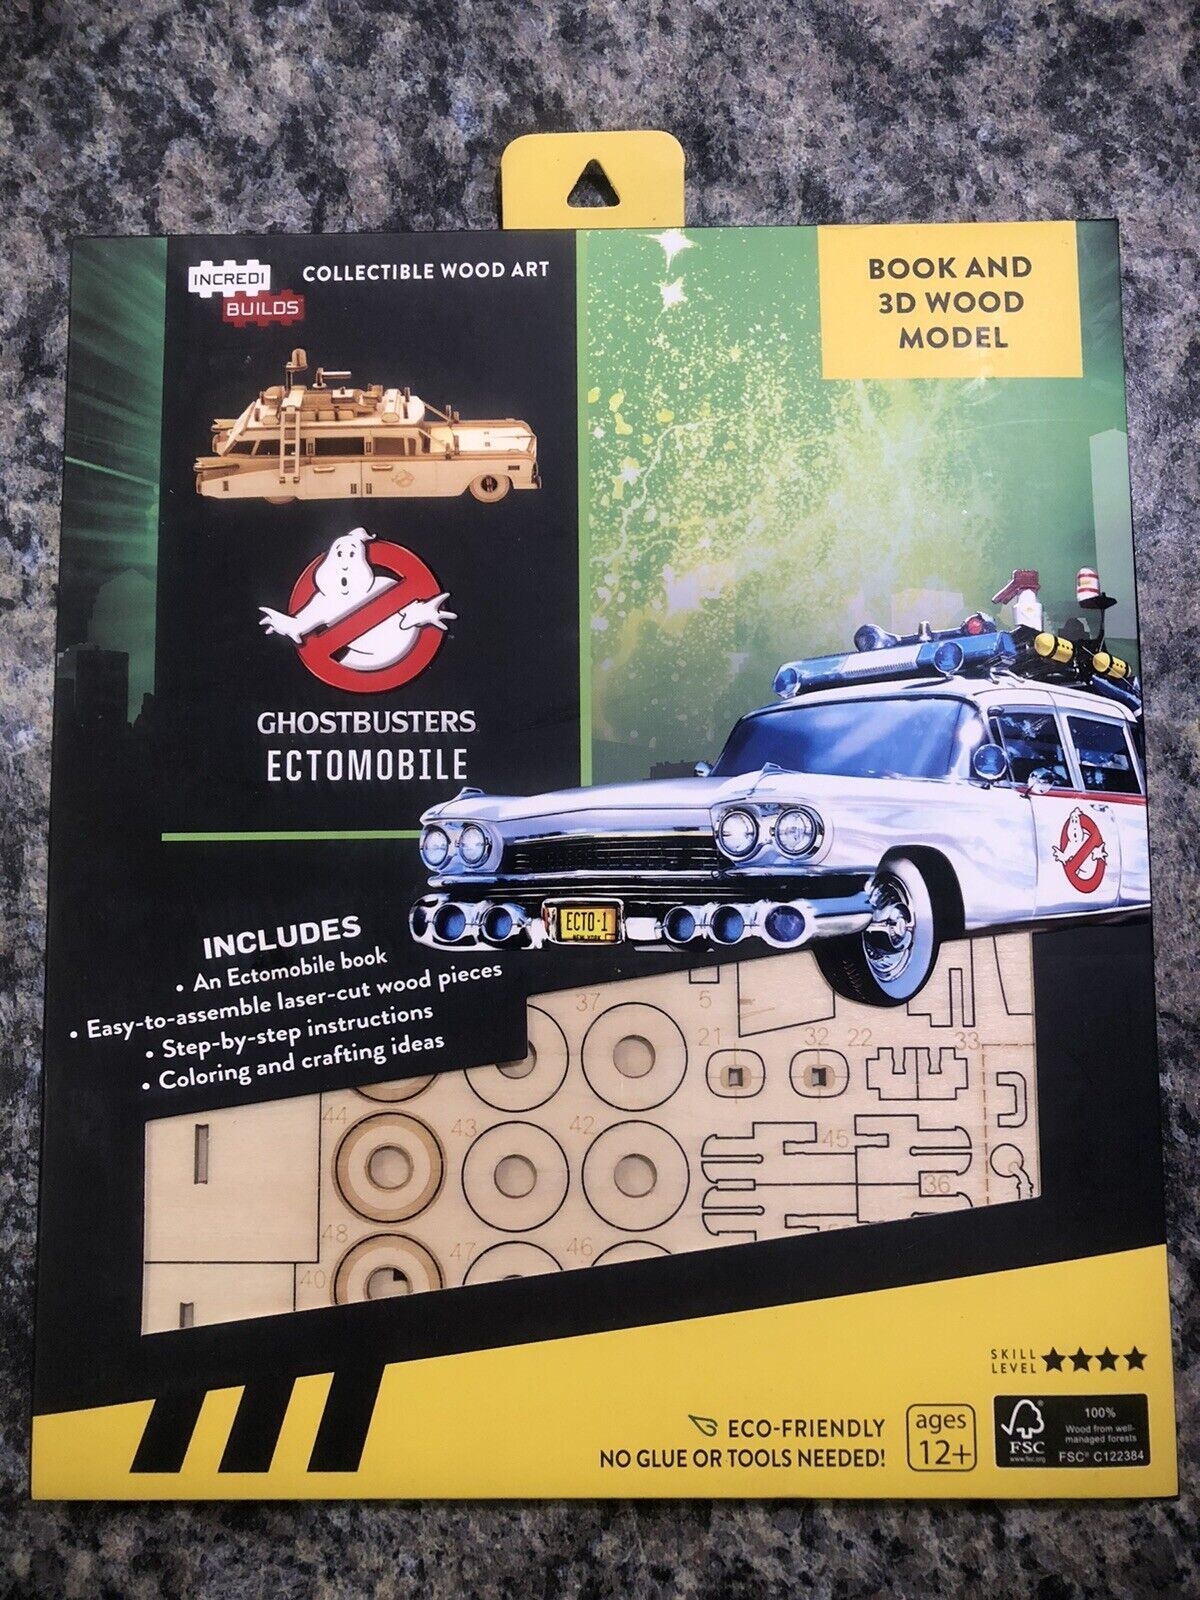 Primary image for IncrediBuilds Ghostbusters Ectomobile Book and 3D Wood Ecto 1 Model Figure Se...